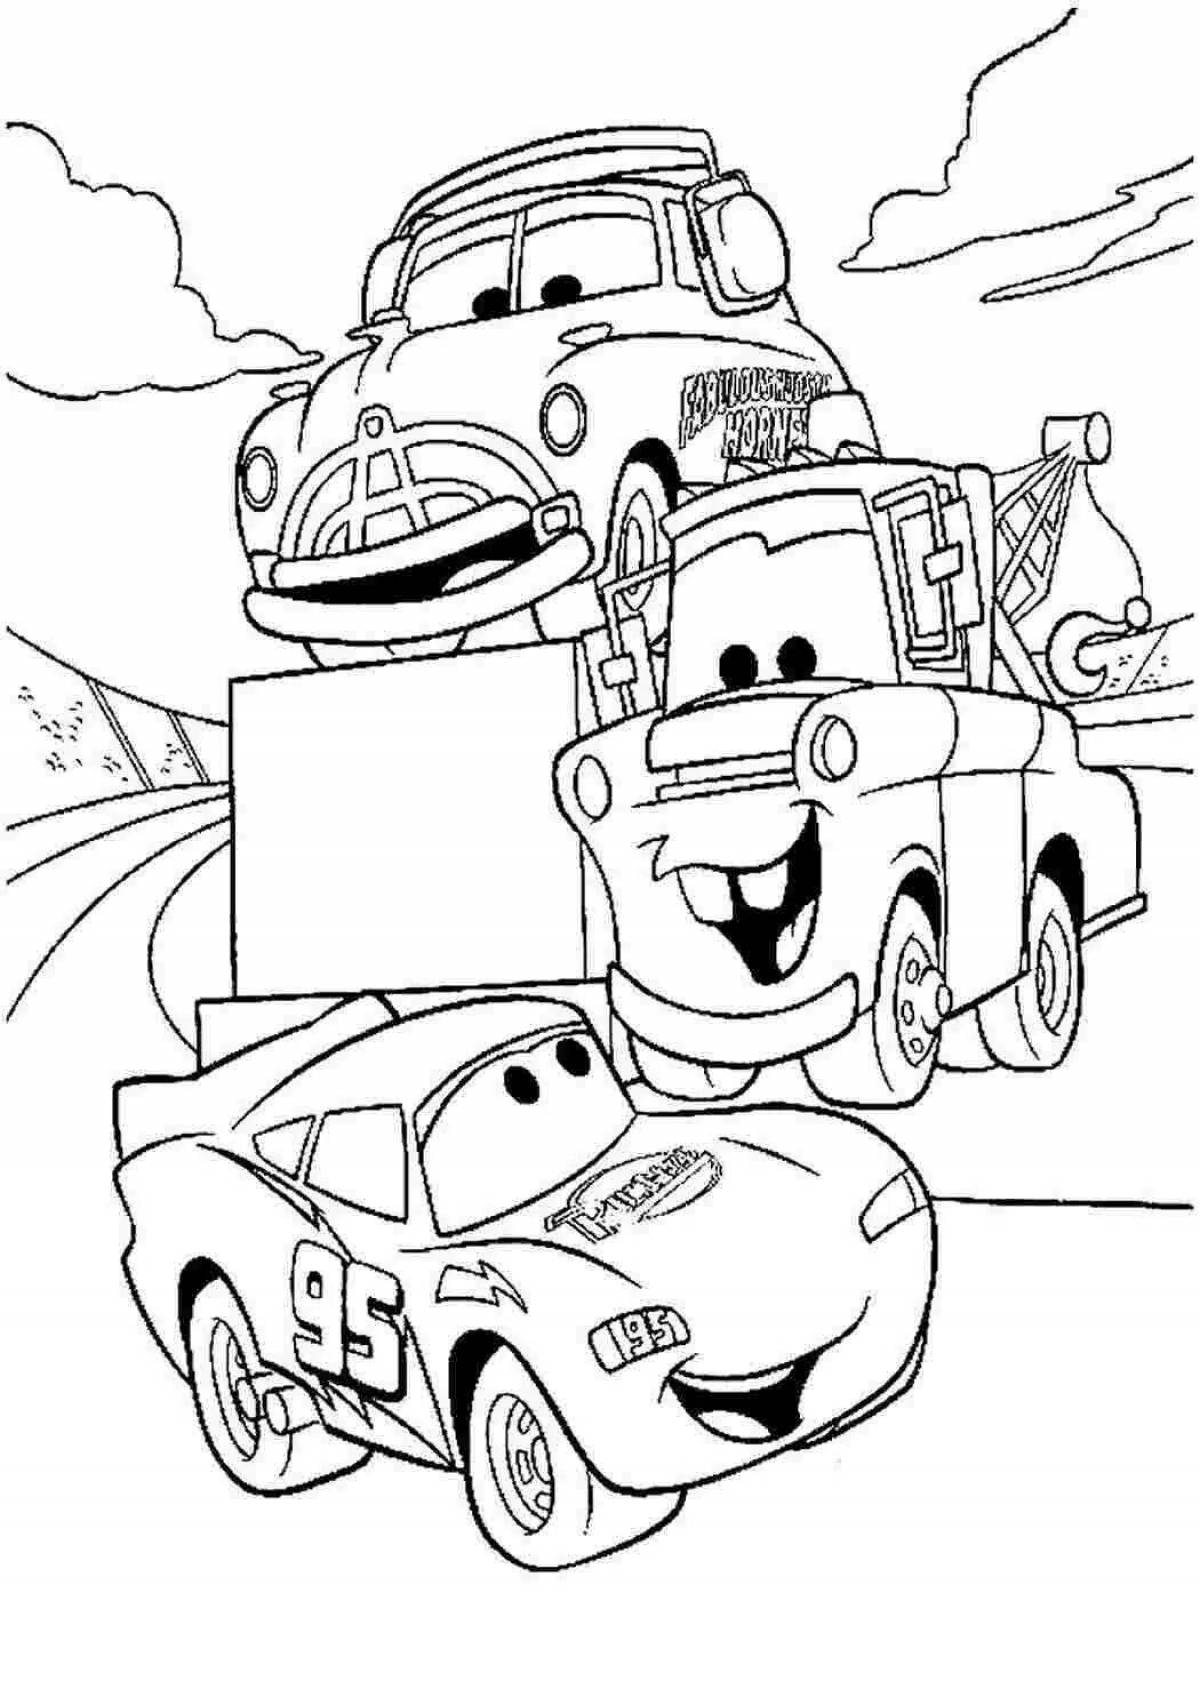 Lightning mcqueen's elegant coloring page